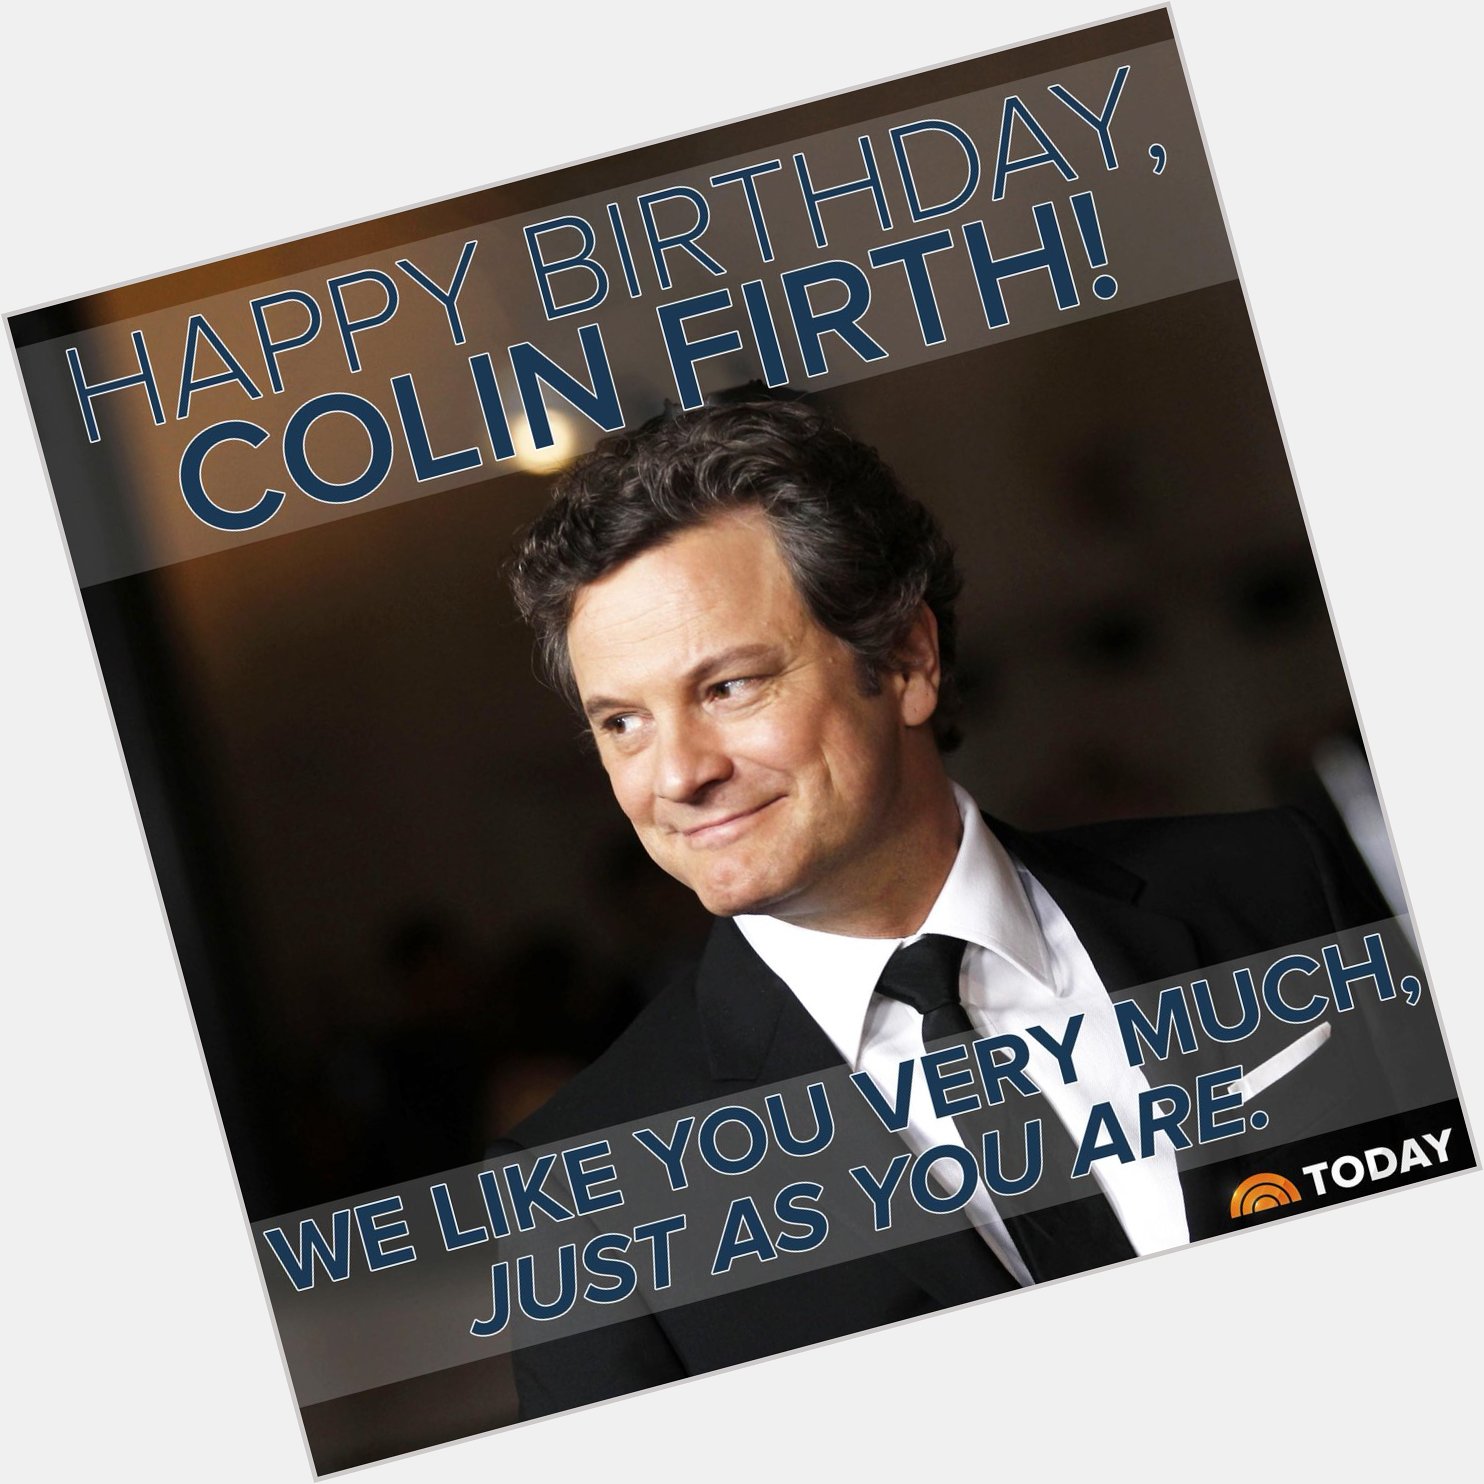 Happy Birthday Colin Firth!

Watch his 5 most swoon-worthy scenes...   via TODAYshow